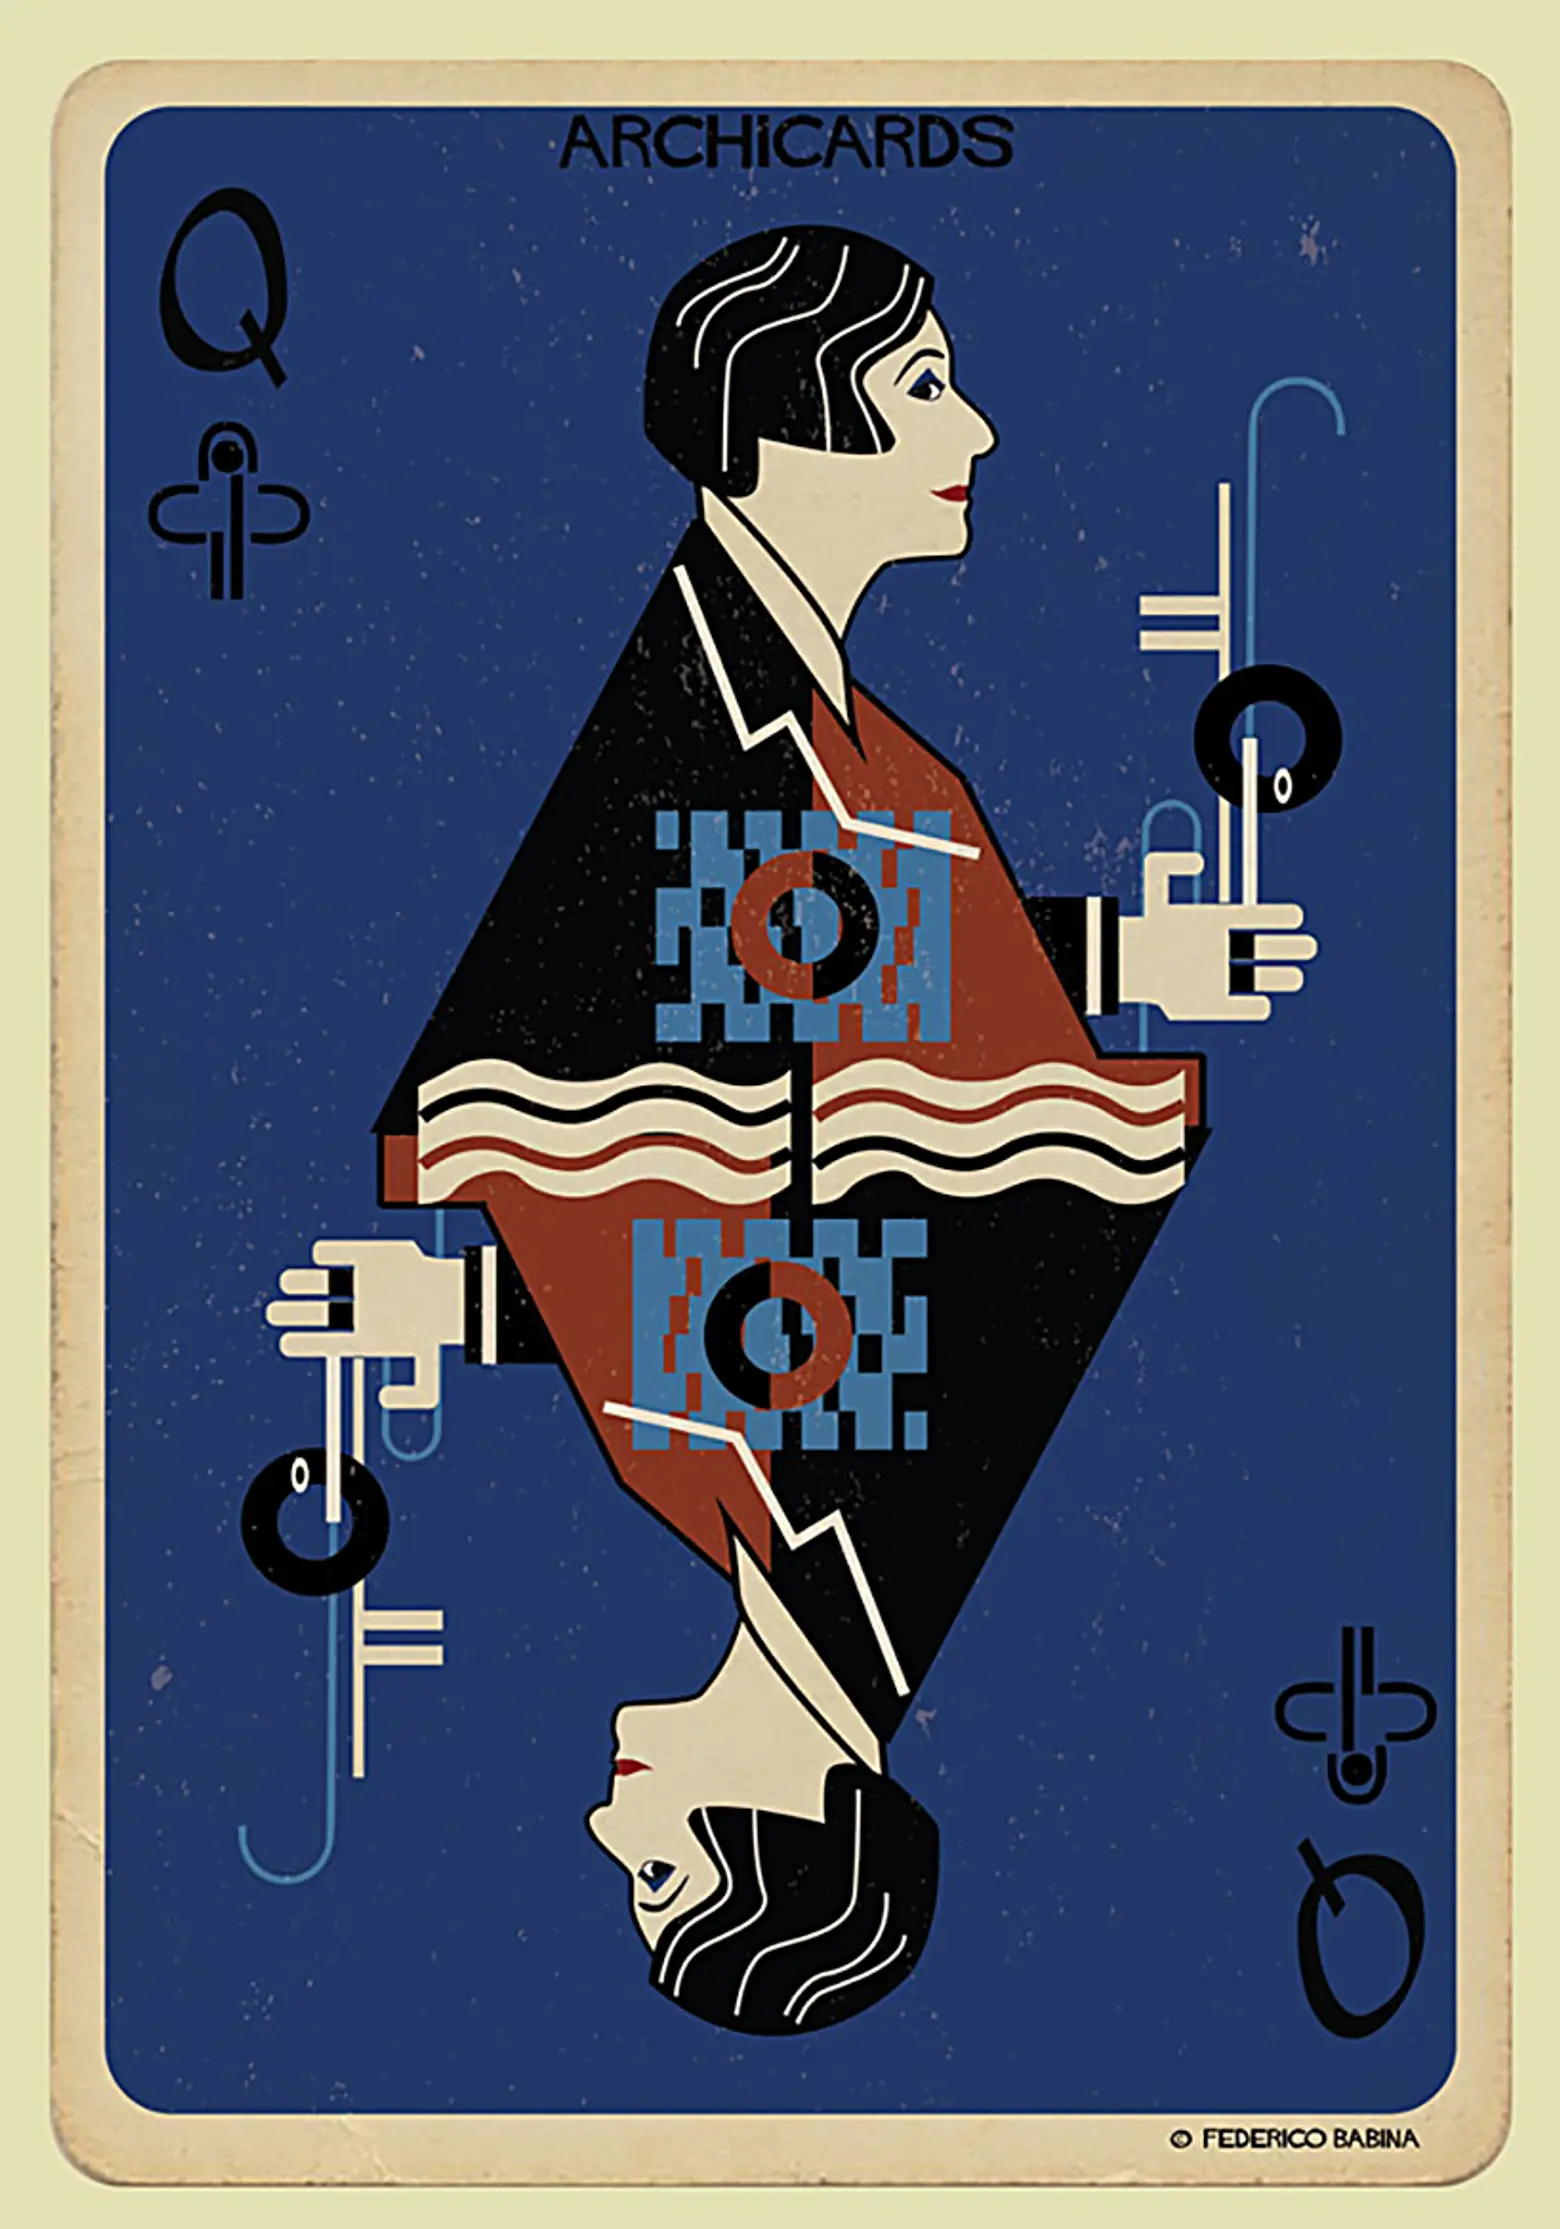 federico-babina-archicards-architecture-playing-cards9